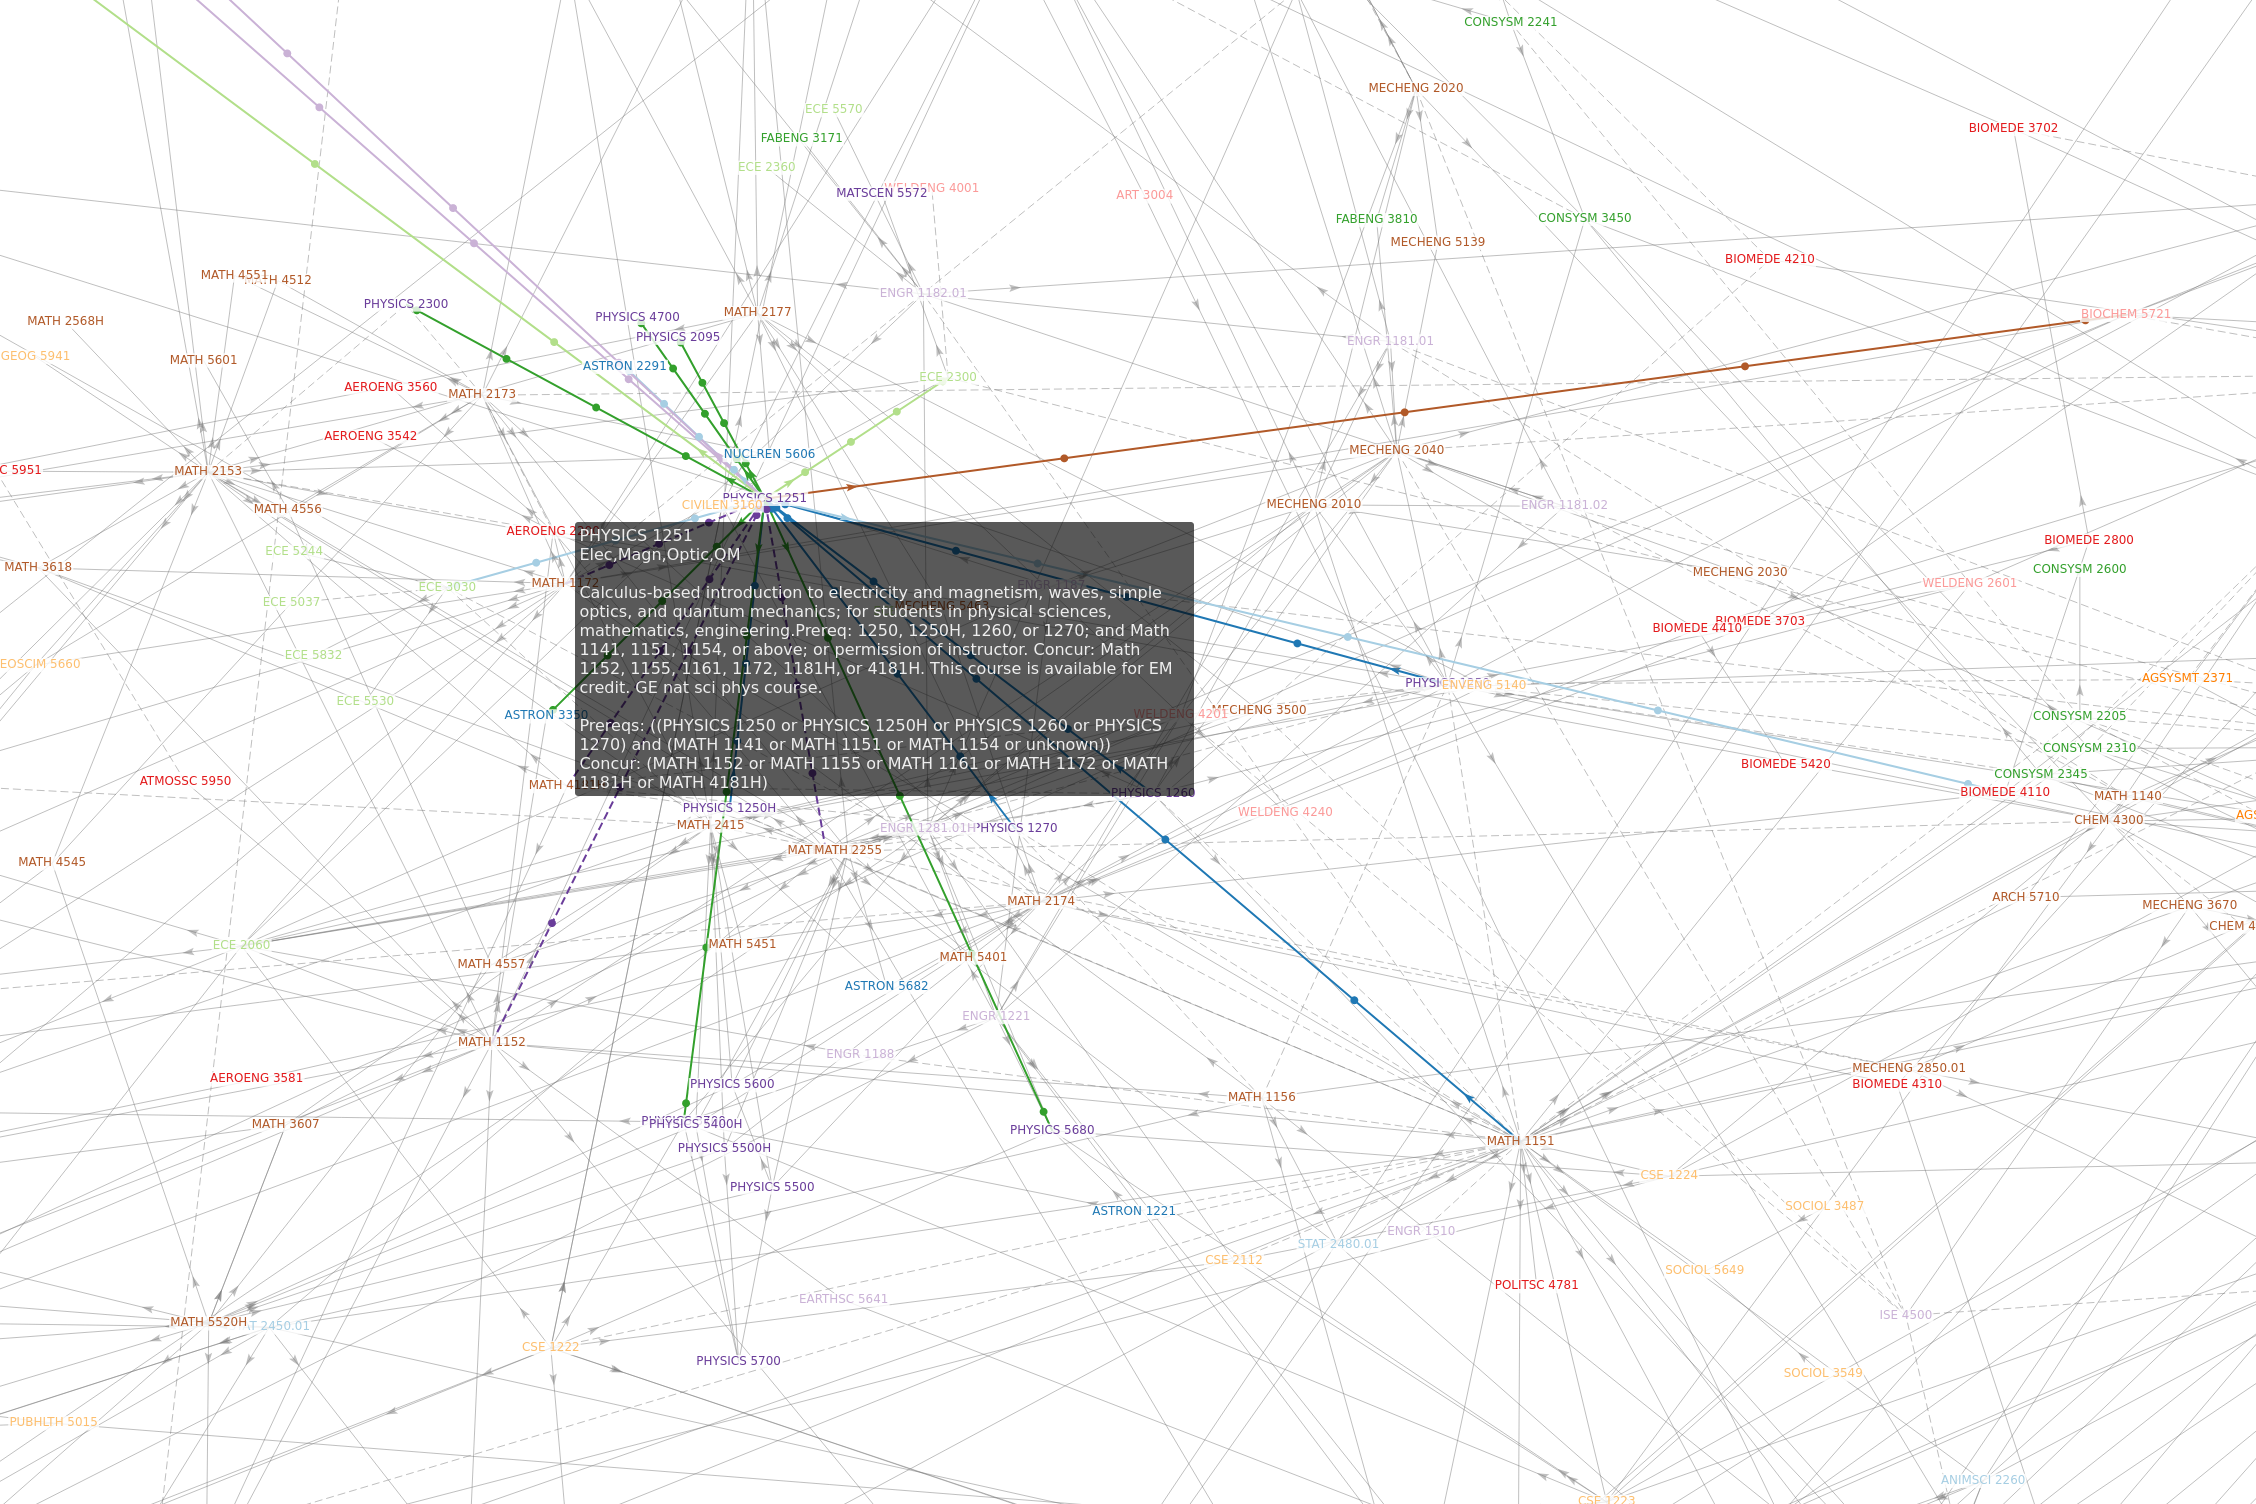 Screenshot of the dependency graph